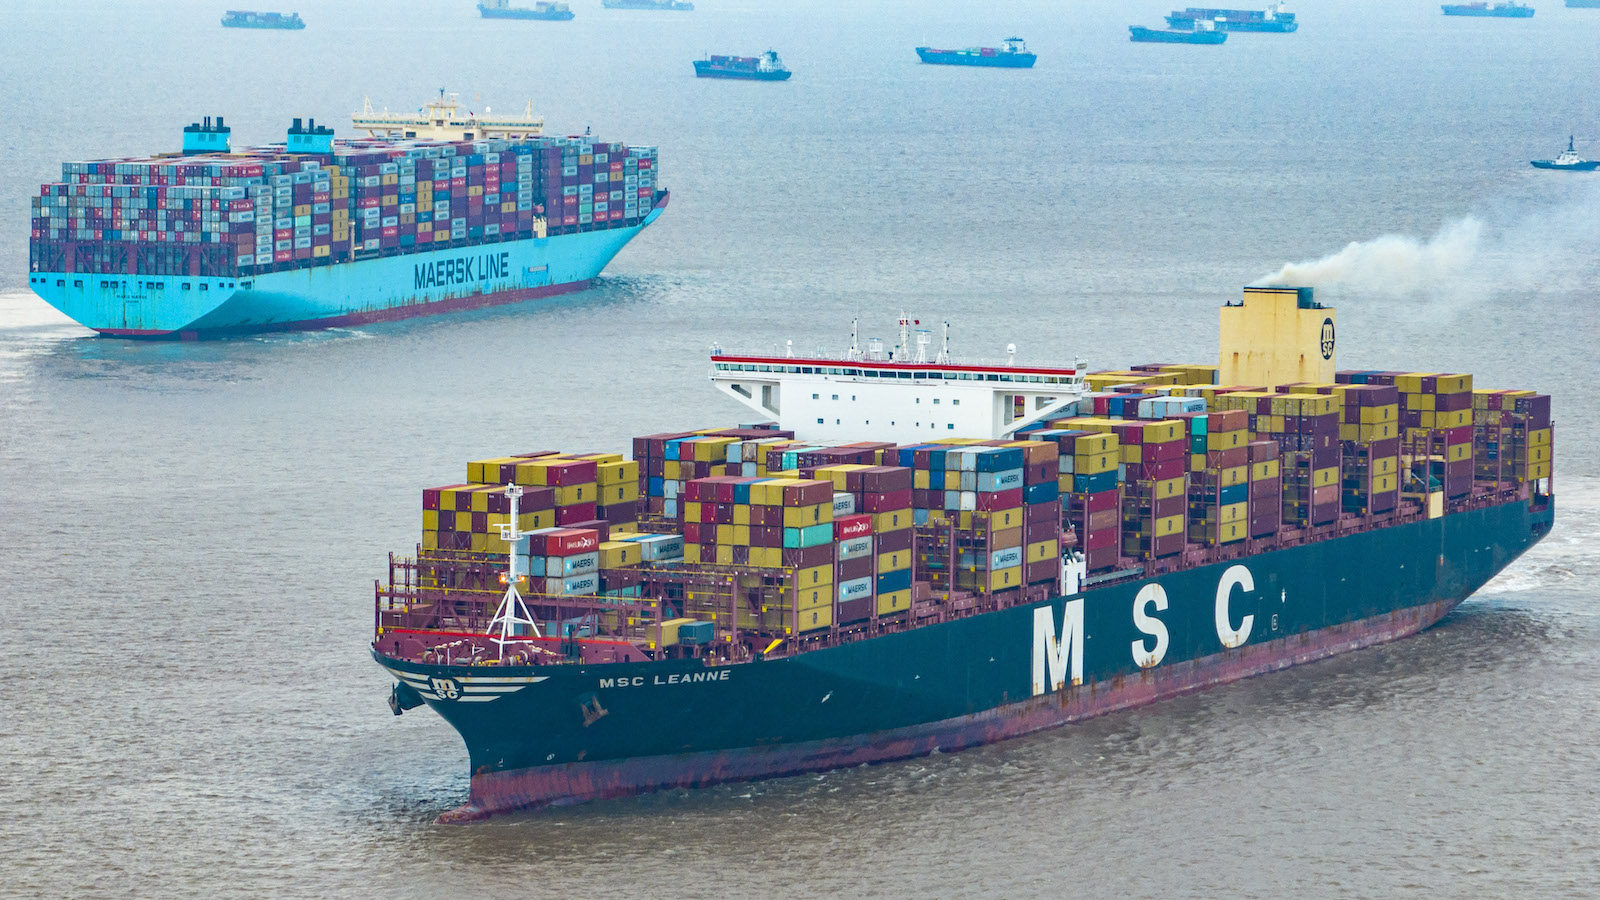 A large cargo ship floating on the water